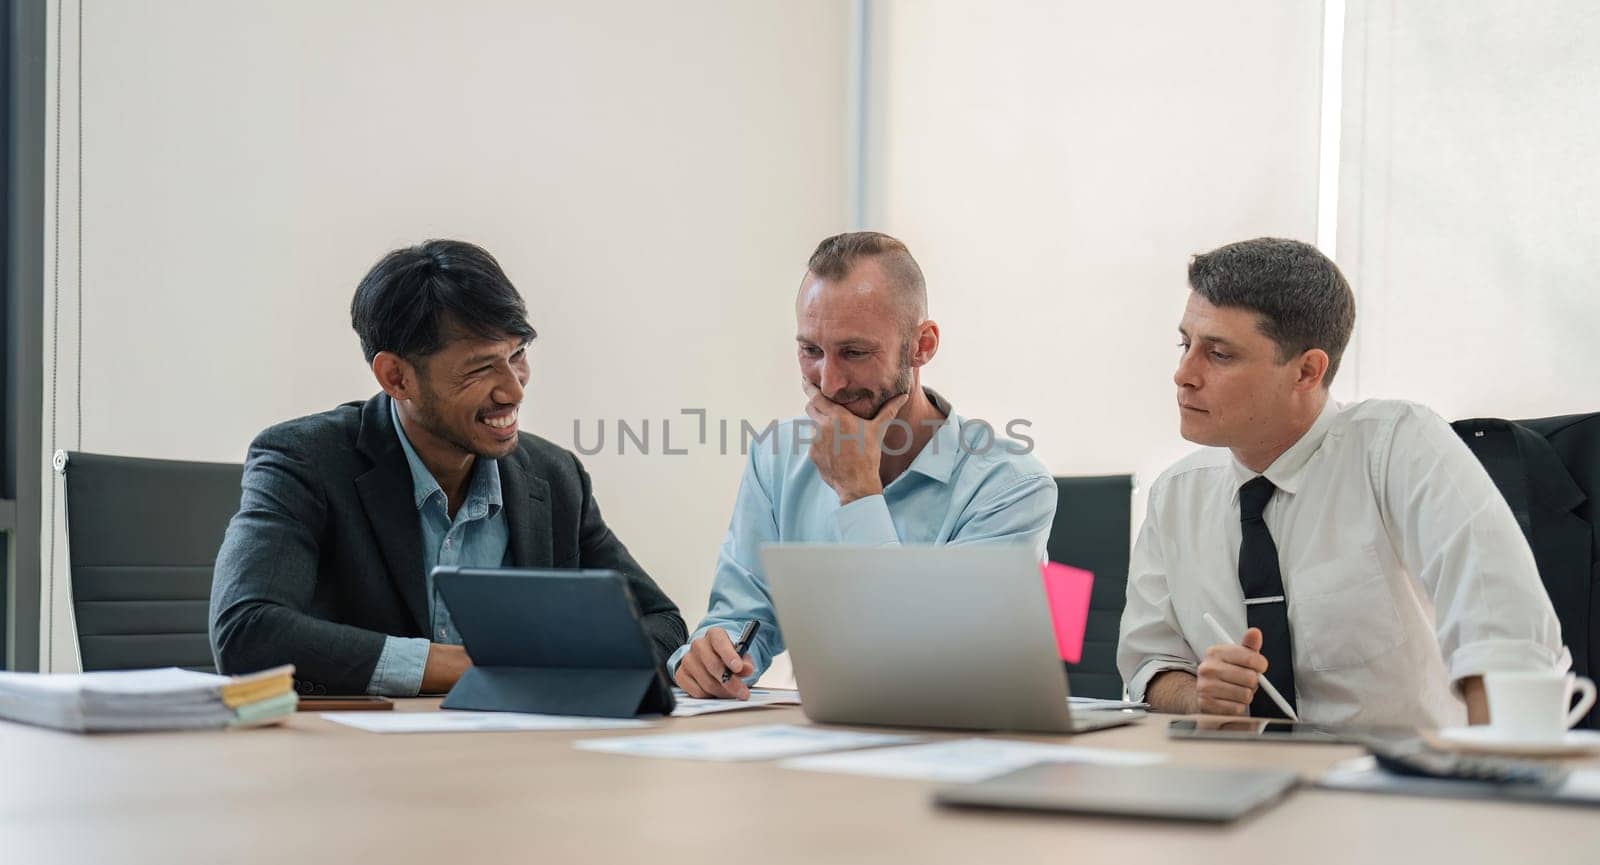 Business team discussing online project, showing computer presentation to skilled team leader. Friendly diverse colleagues working in pairs on laptop.